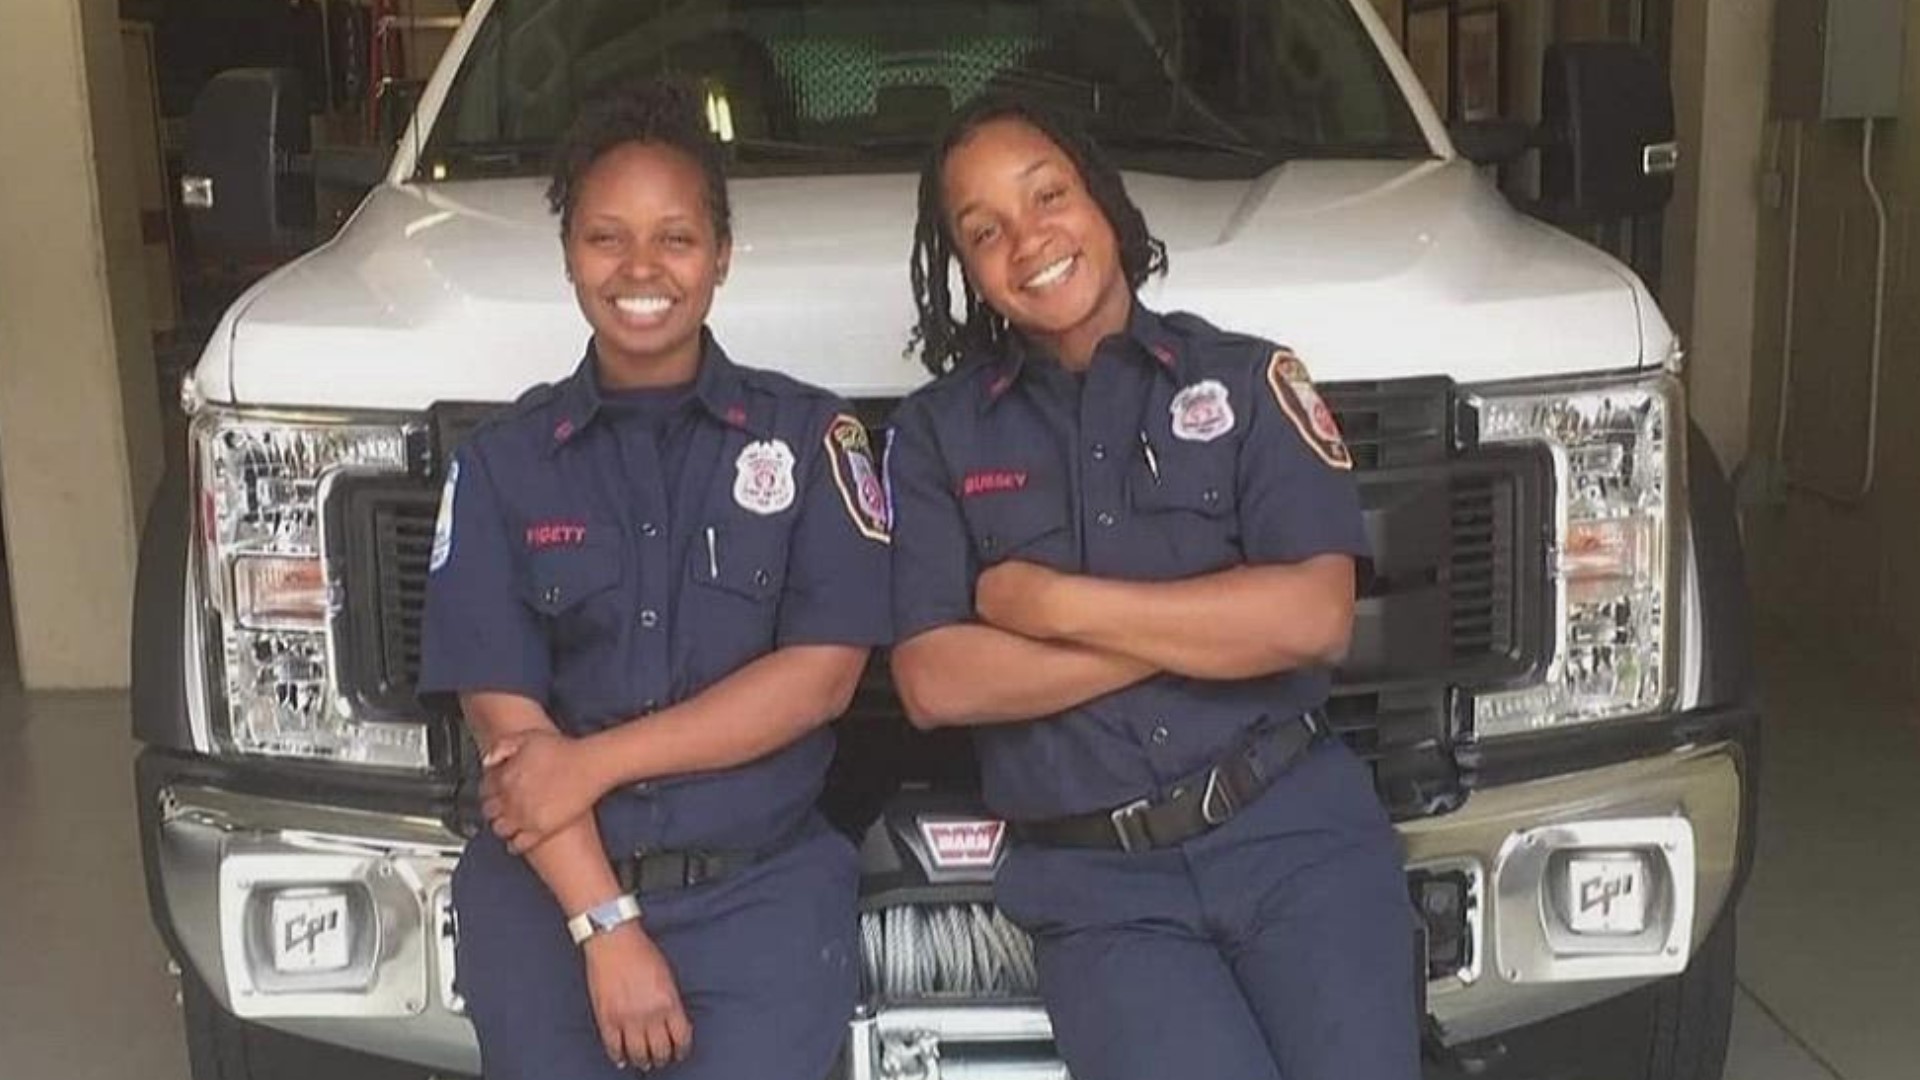 Women firefighters are breaking records at Decatur Fire Department.